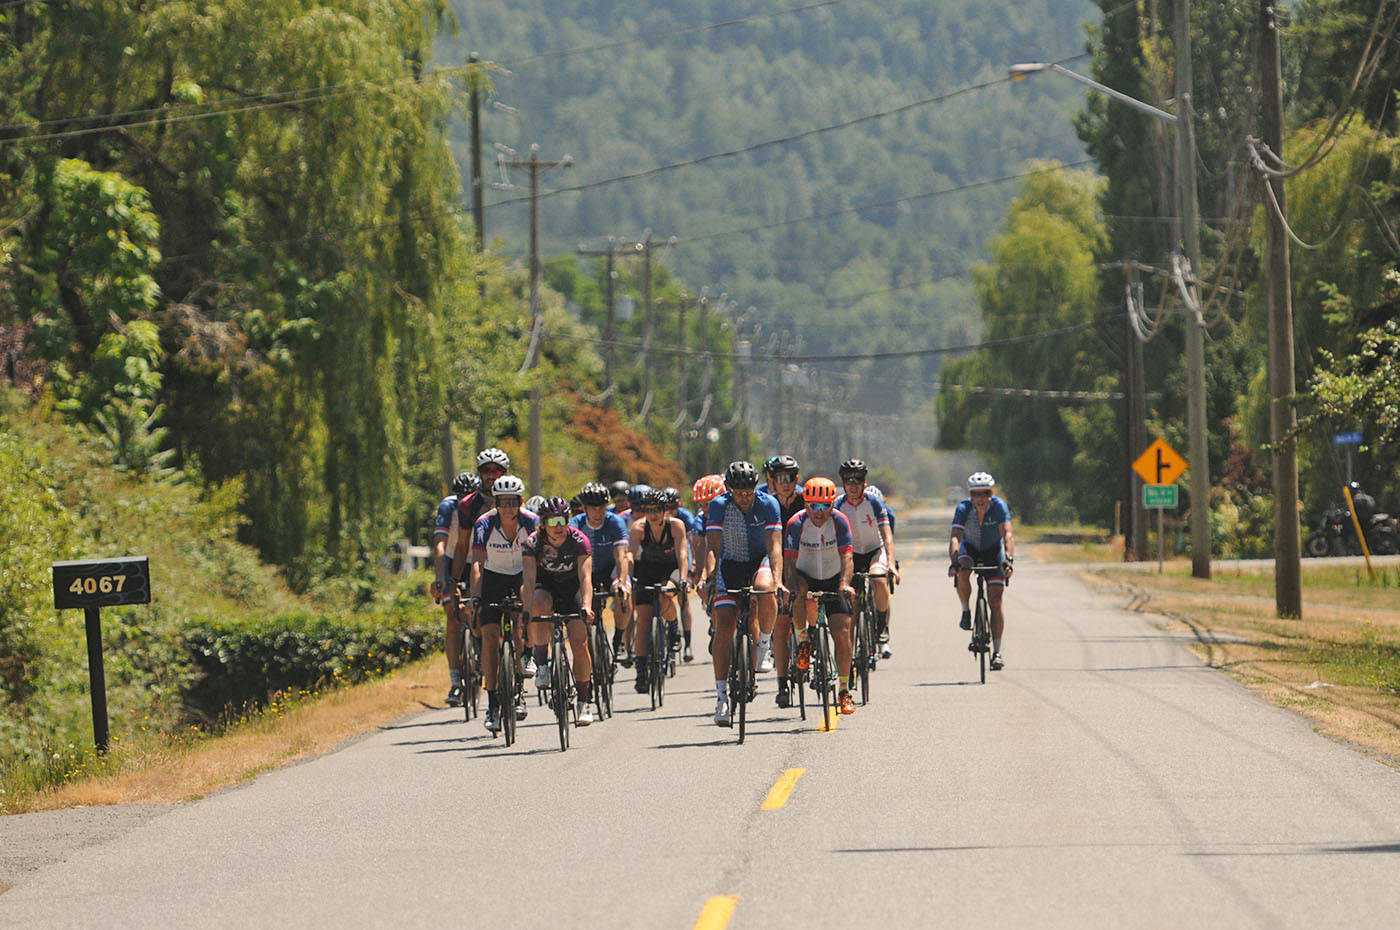 The Fraser Valley Try Like Terry team rides down Boundary Road during the Ride of Hope on Saturday, July 3, 2021. (Jenna Hauck/ Chilliwack Progress)